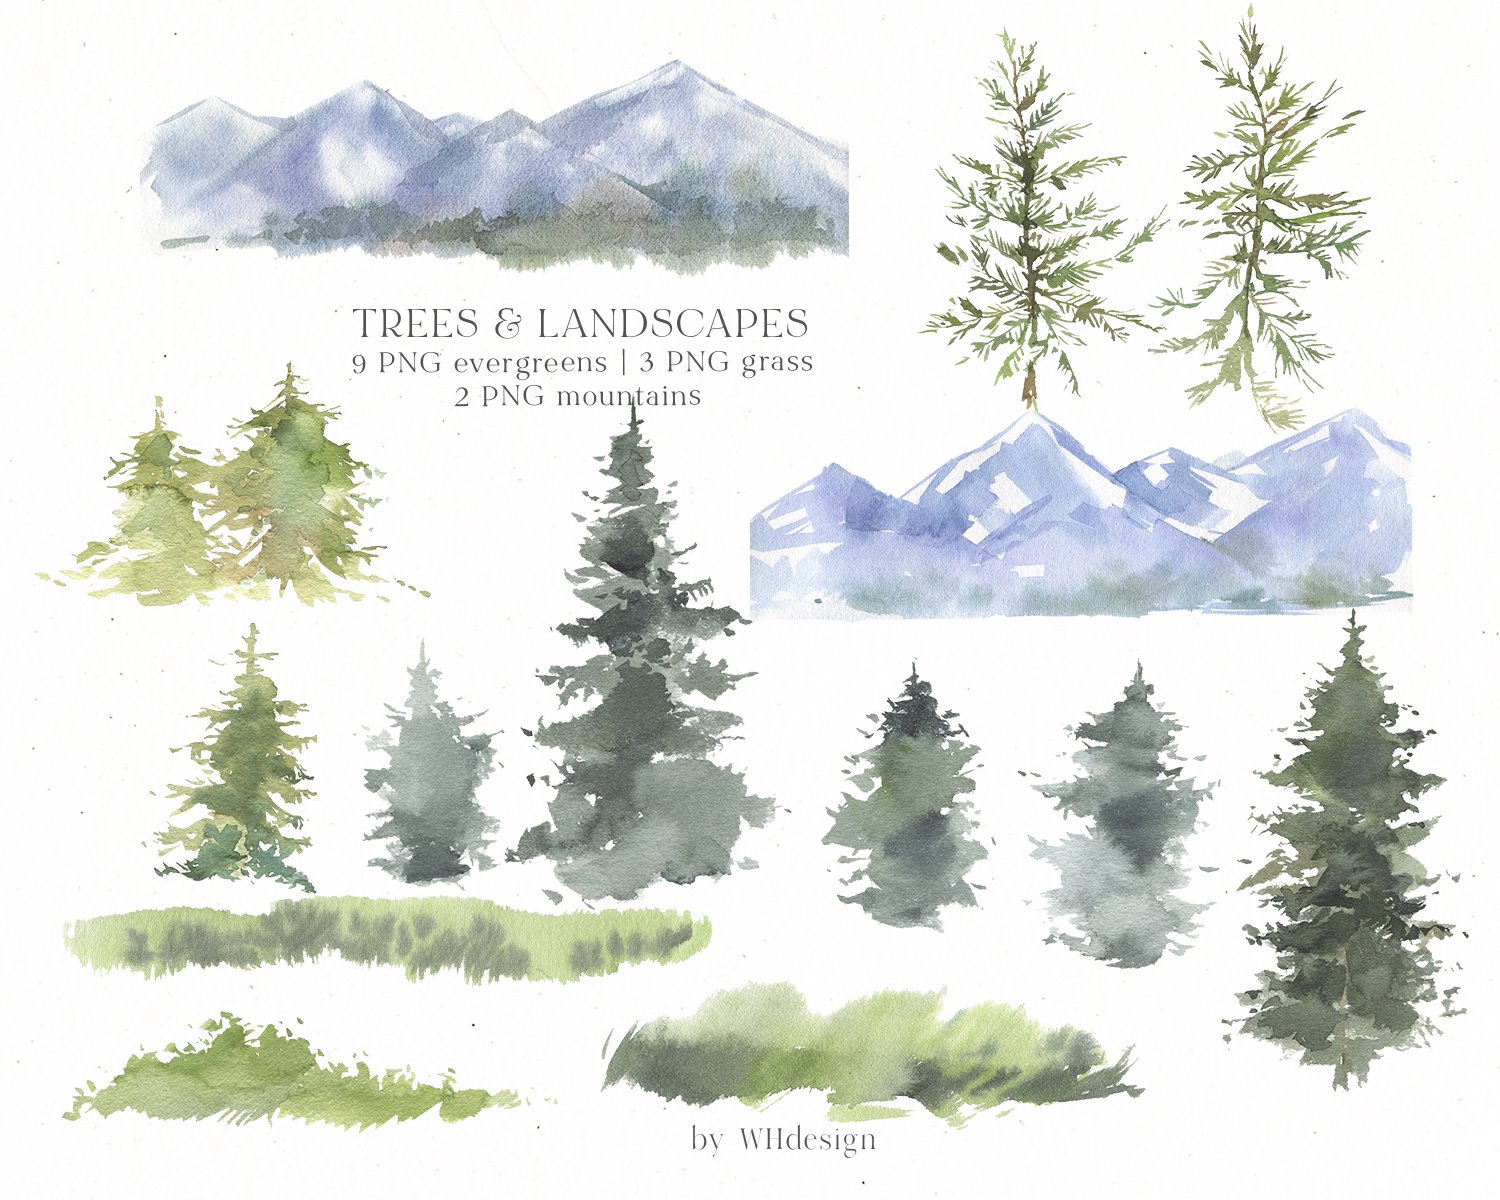 Watercolor painting of trees and landscapes by Katerina Wilczynski.